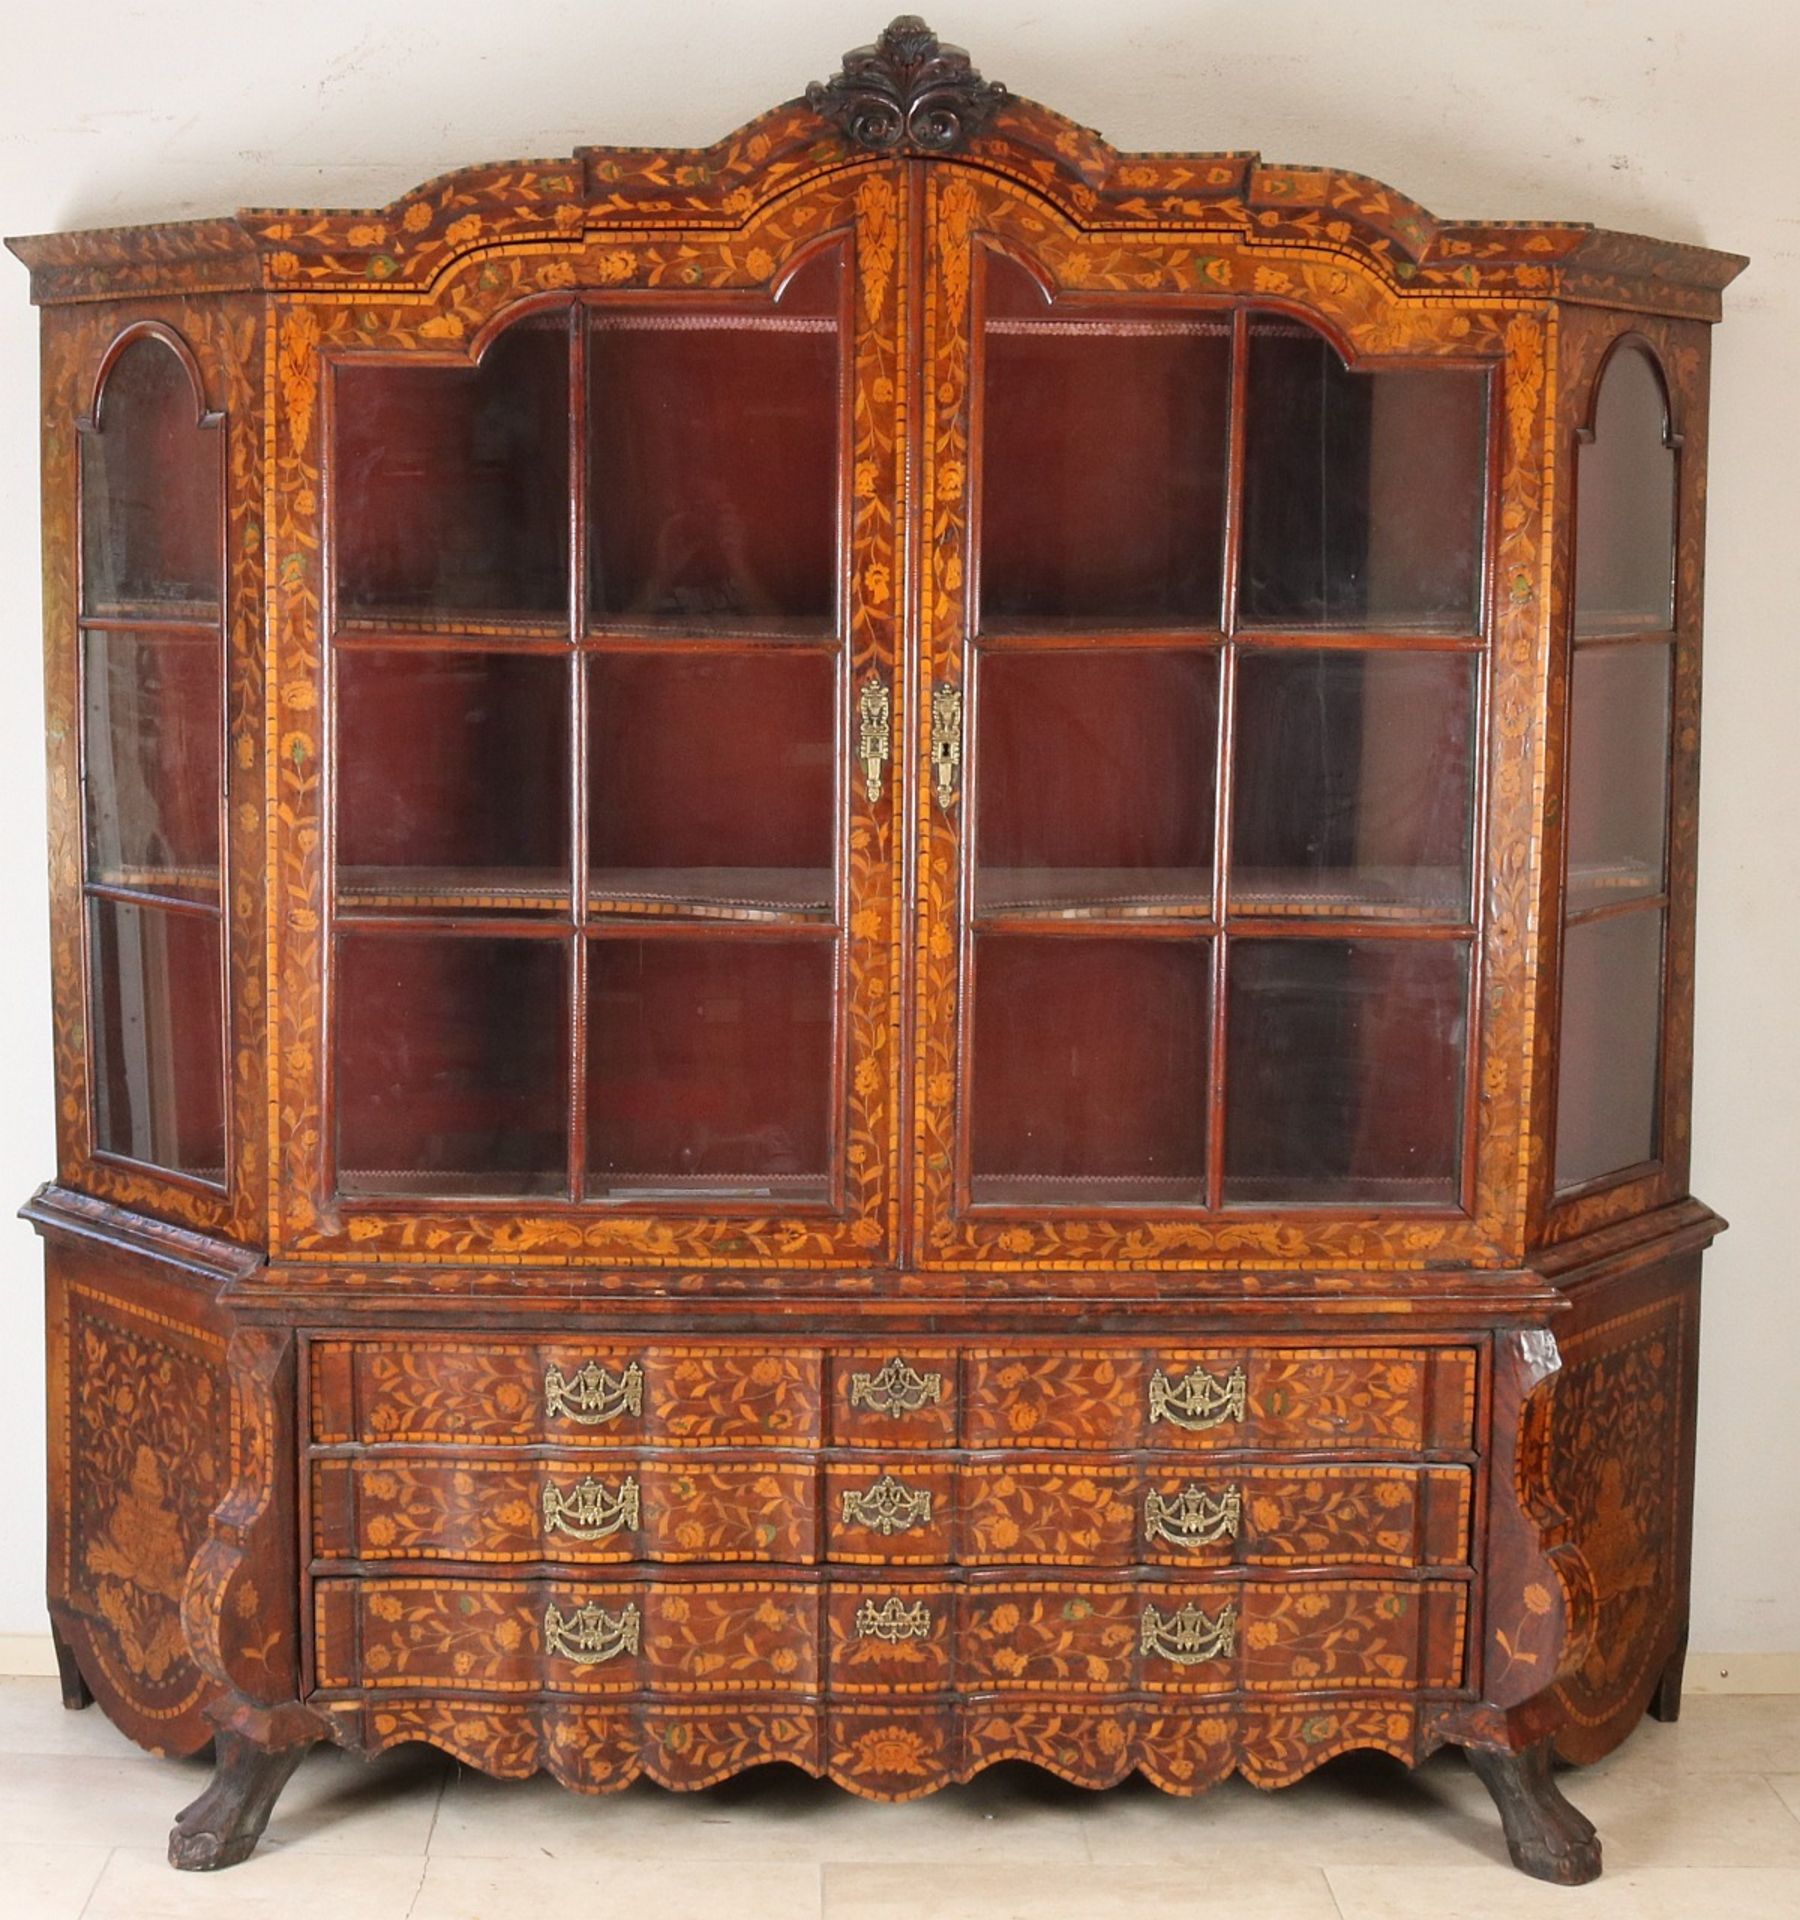 Rare display cabinet with marquetry